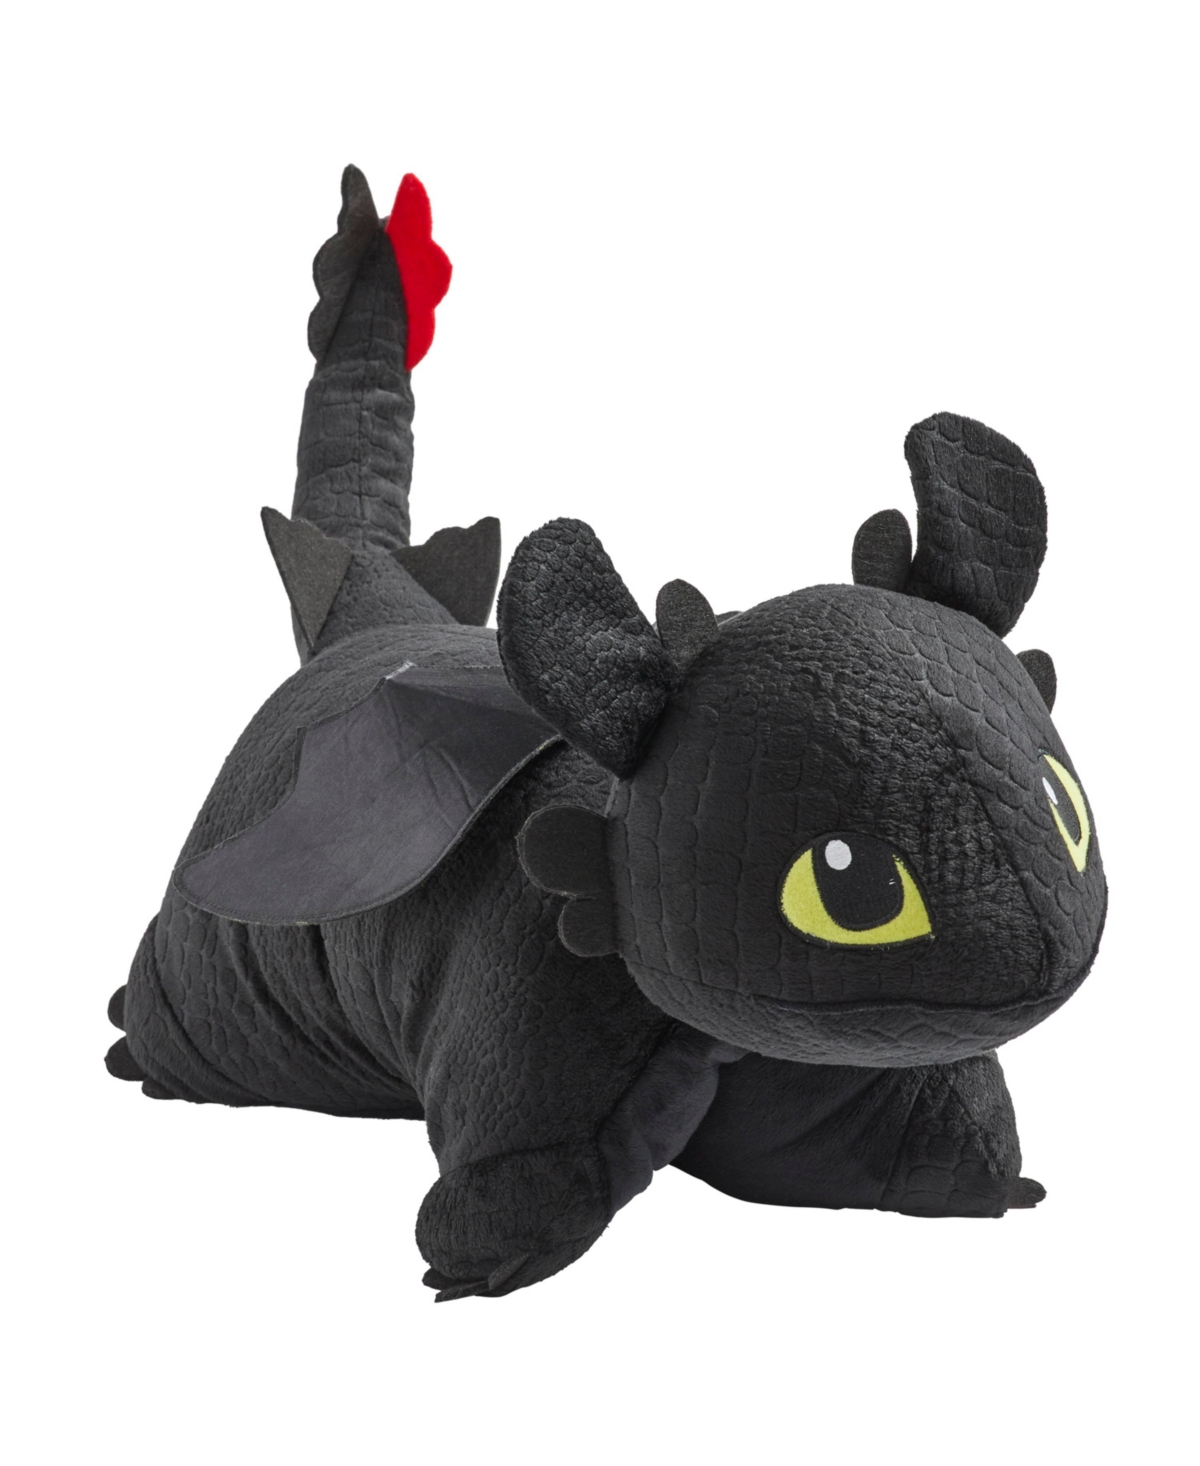 Pillow Pets Nbcuniversal Toothless Stuffed Animal Plush Toy In Multi